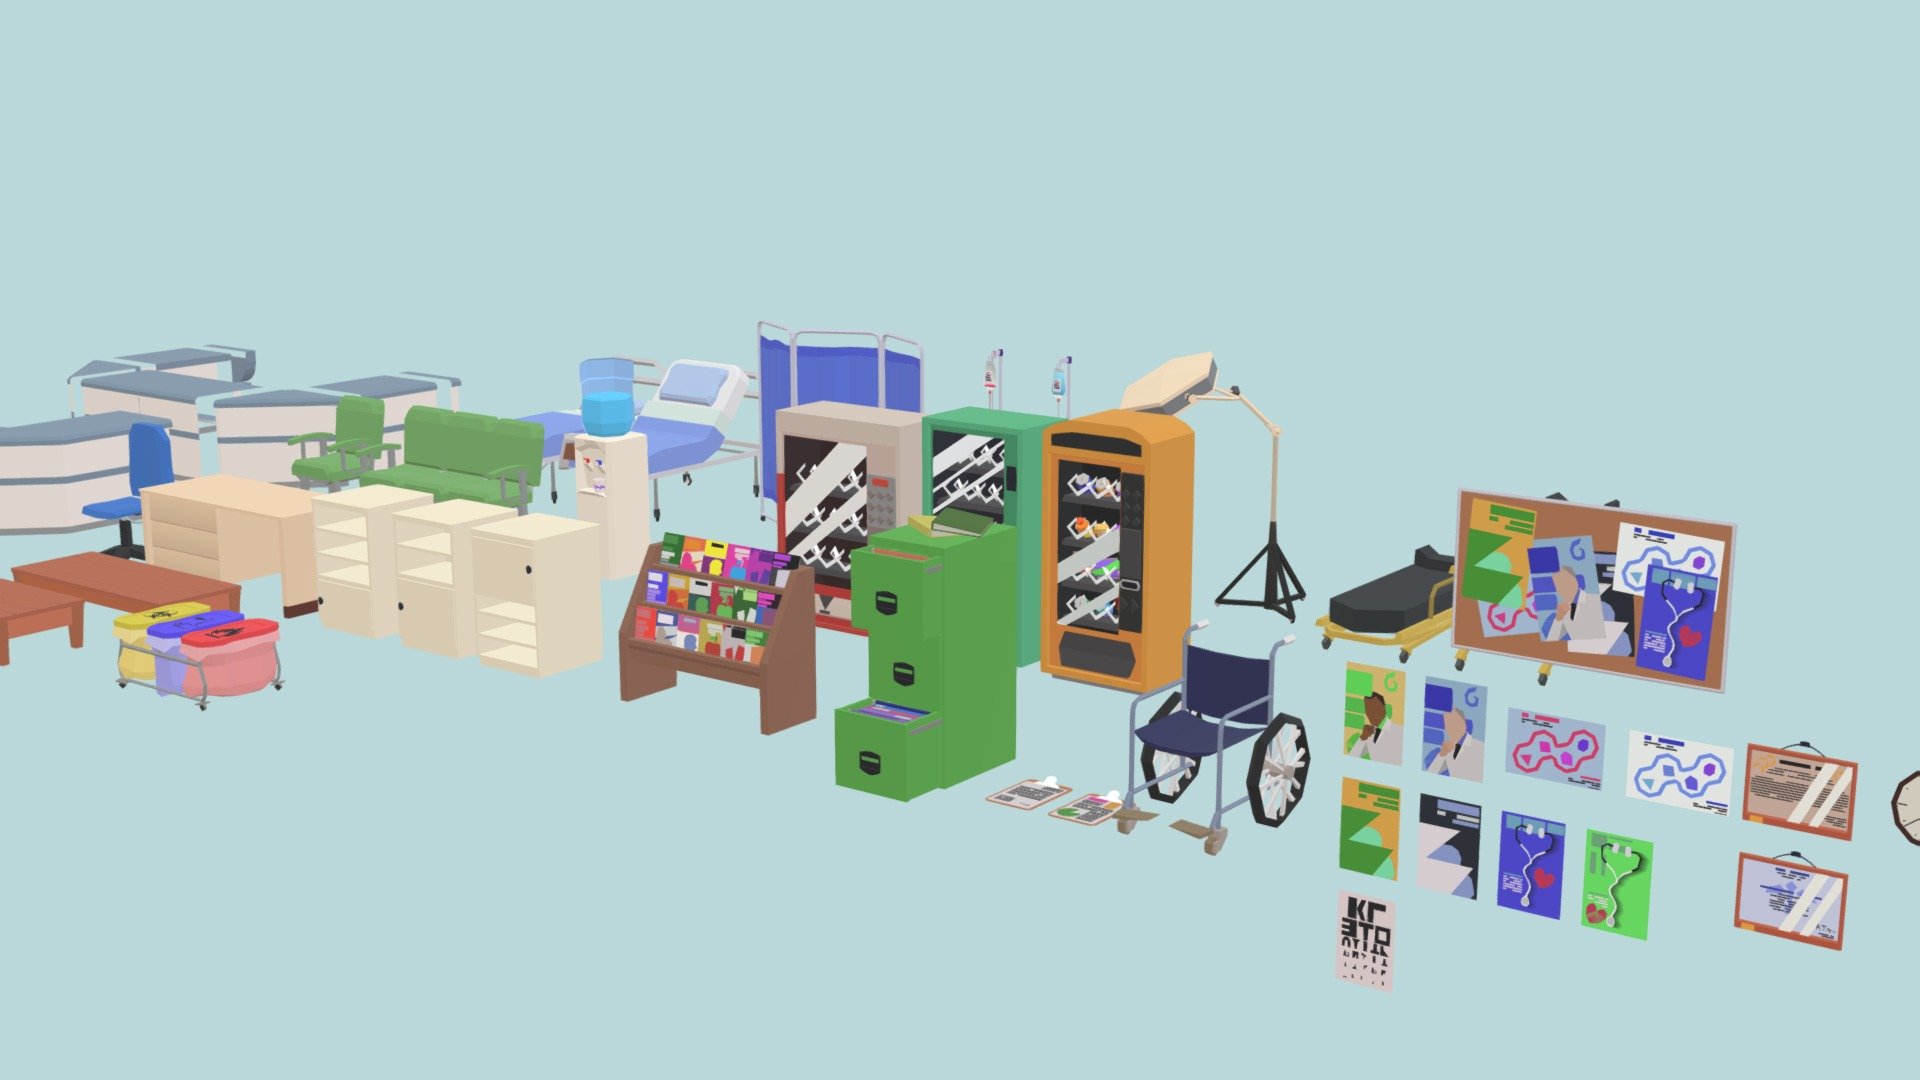 A bunch of hospital props i was commissioned to make
The props are made in parts to be under 300 tris, and with flat vertex color instead of textures
the props include; poster, gurny, vending machines, hospital beds, monitors, cabinets, drawers, tables, lights, computers, displays, plants, plantpots, benches, and various miscellaneous medical equipment - Hospital Props Low Poly Vertex Color - 3D model by Alice (@alisona) 3d model